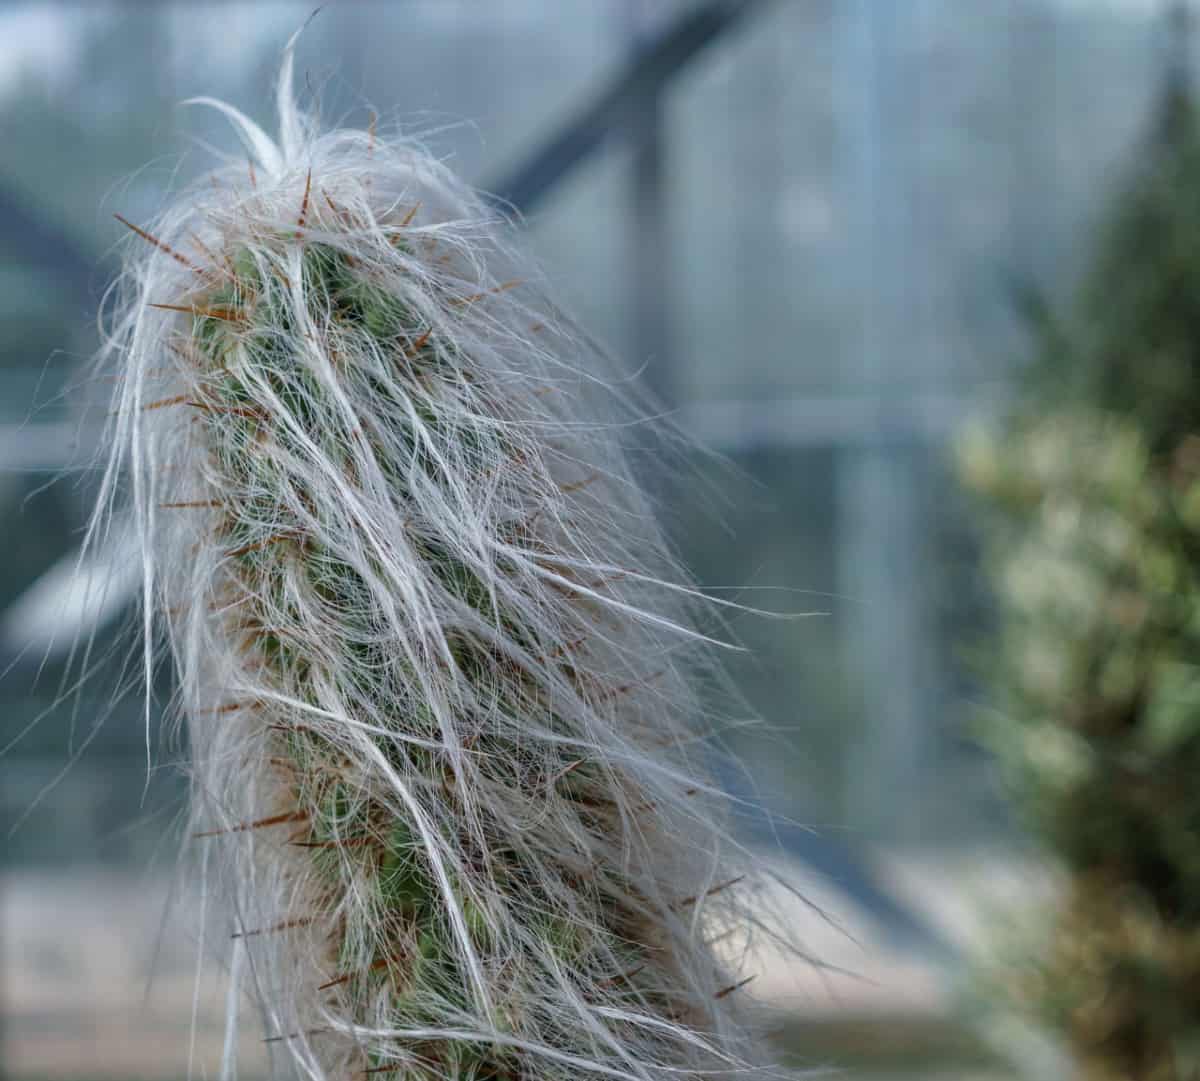 The hairy old man cactus can grow to 45 feet tall if not kept in a pot.